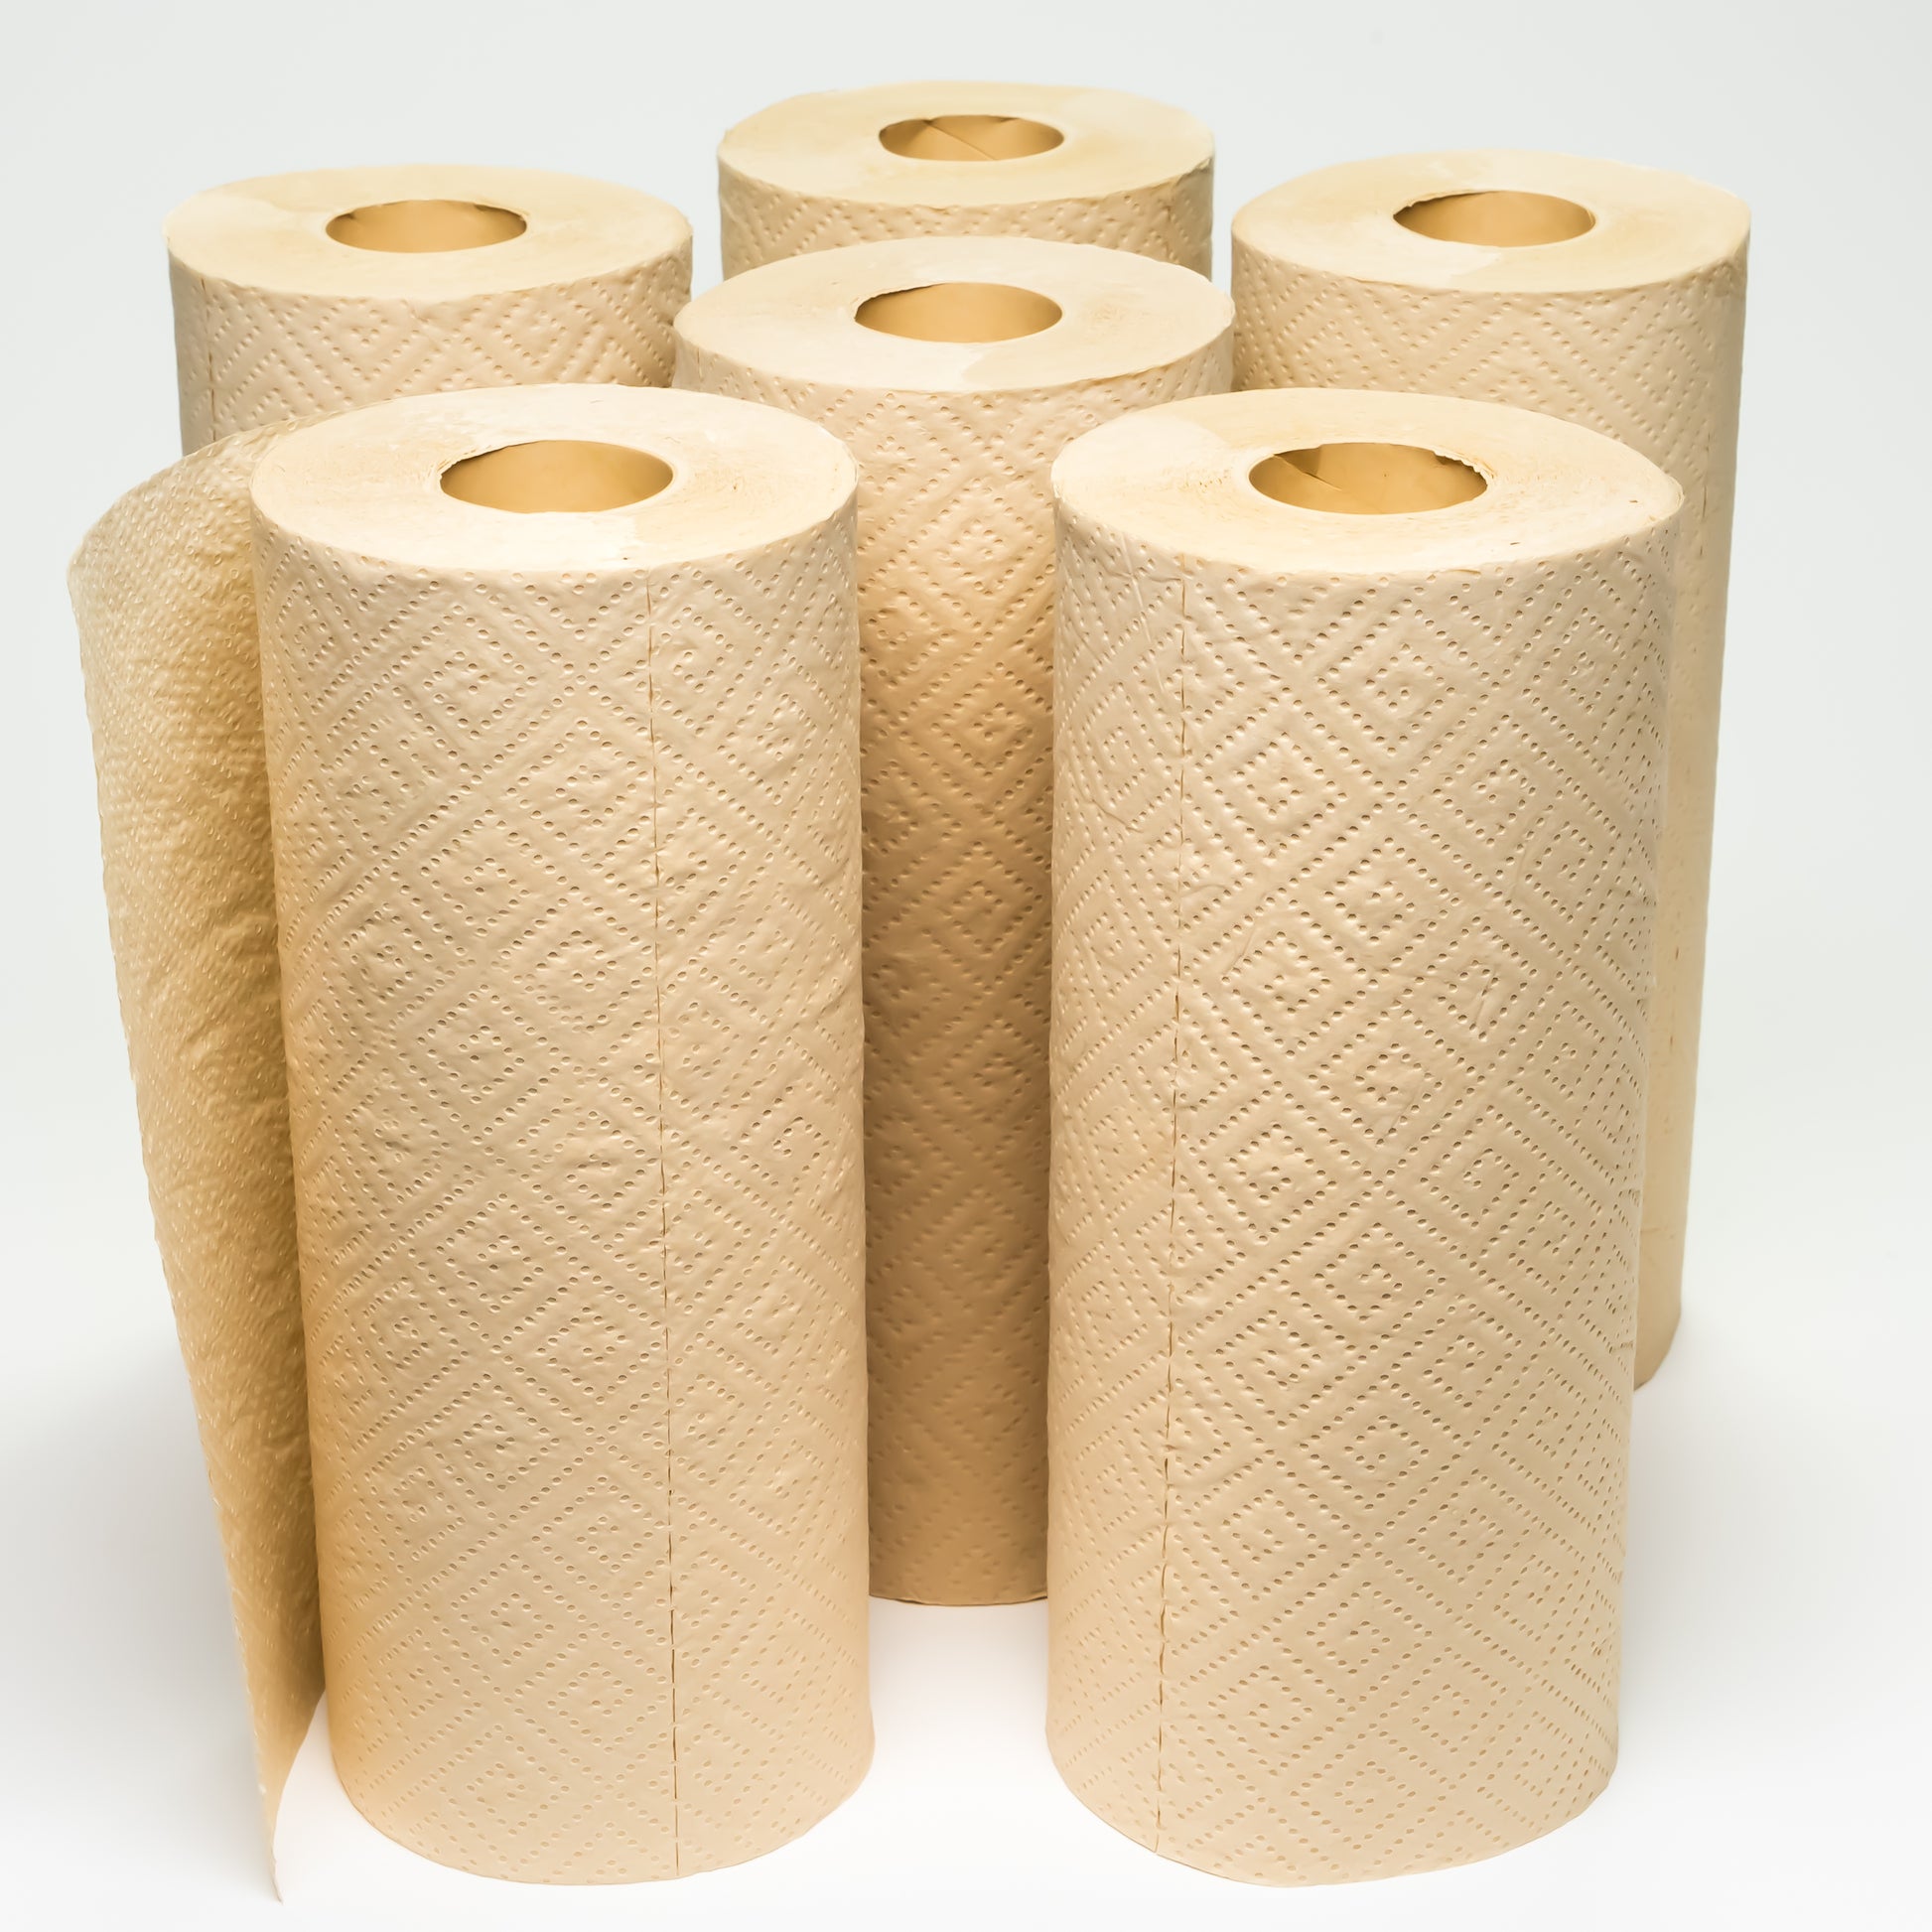 Reusable Washable Bamboo Paper Towels 2-Roll Pack - 100% Organic